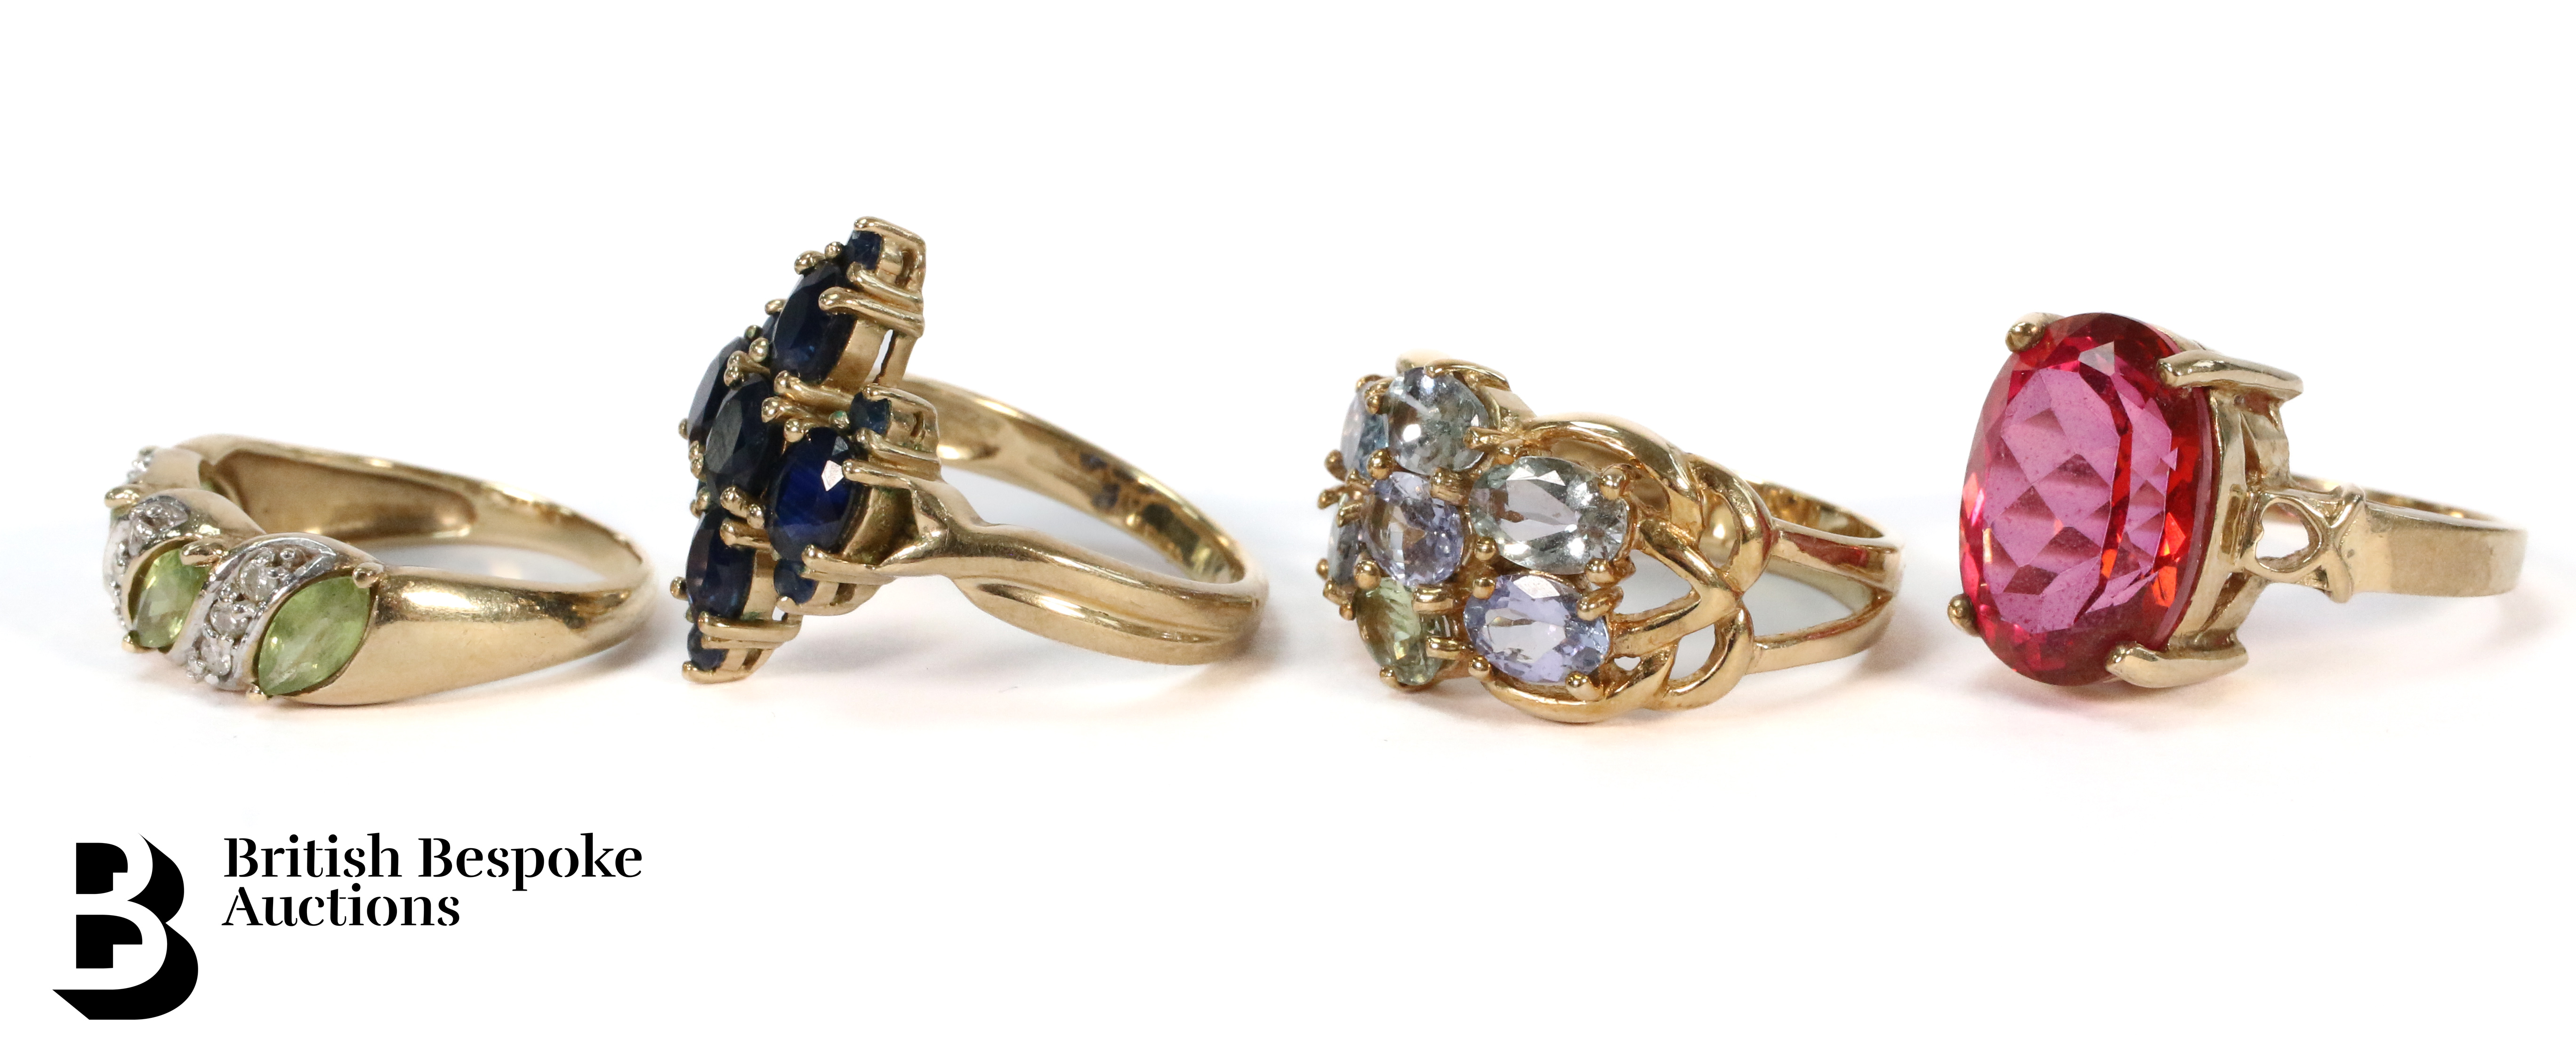 Four 9ct Yellow Gold Rings - Image 2 of 3